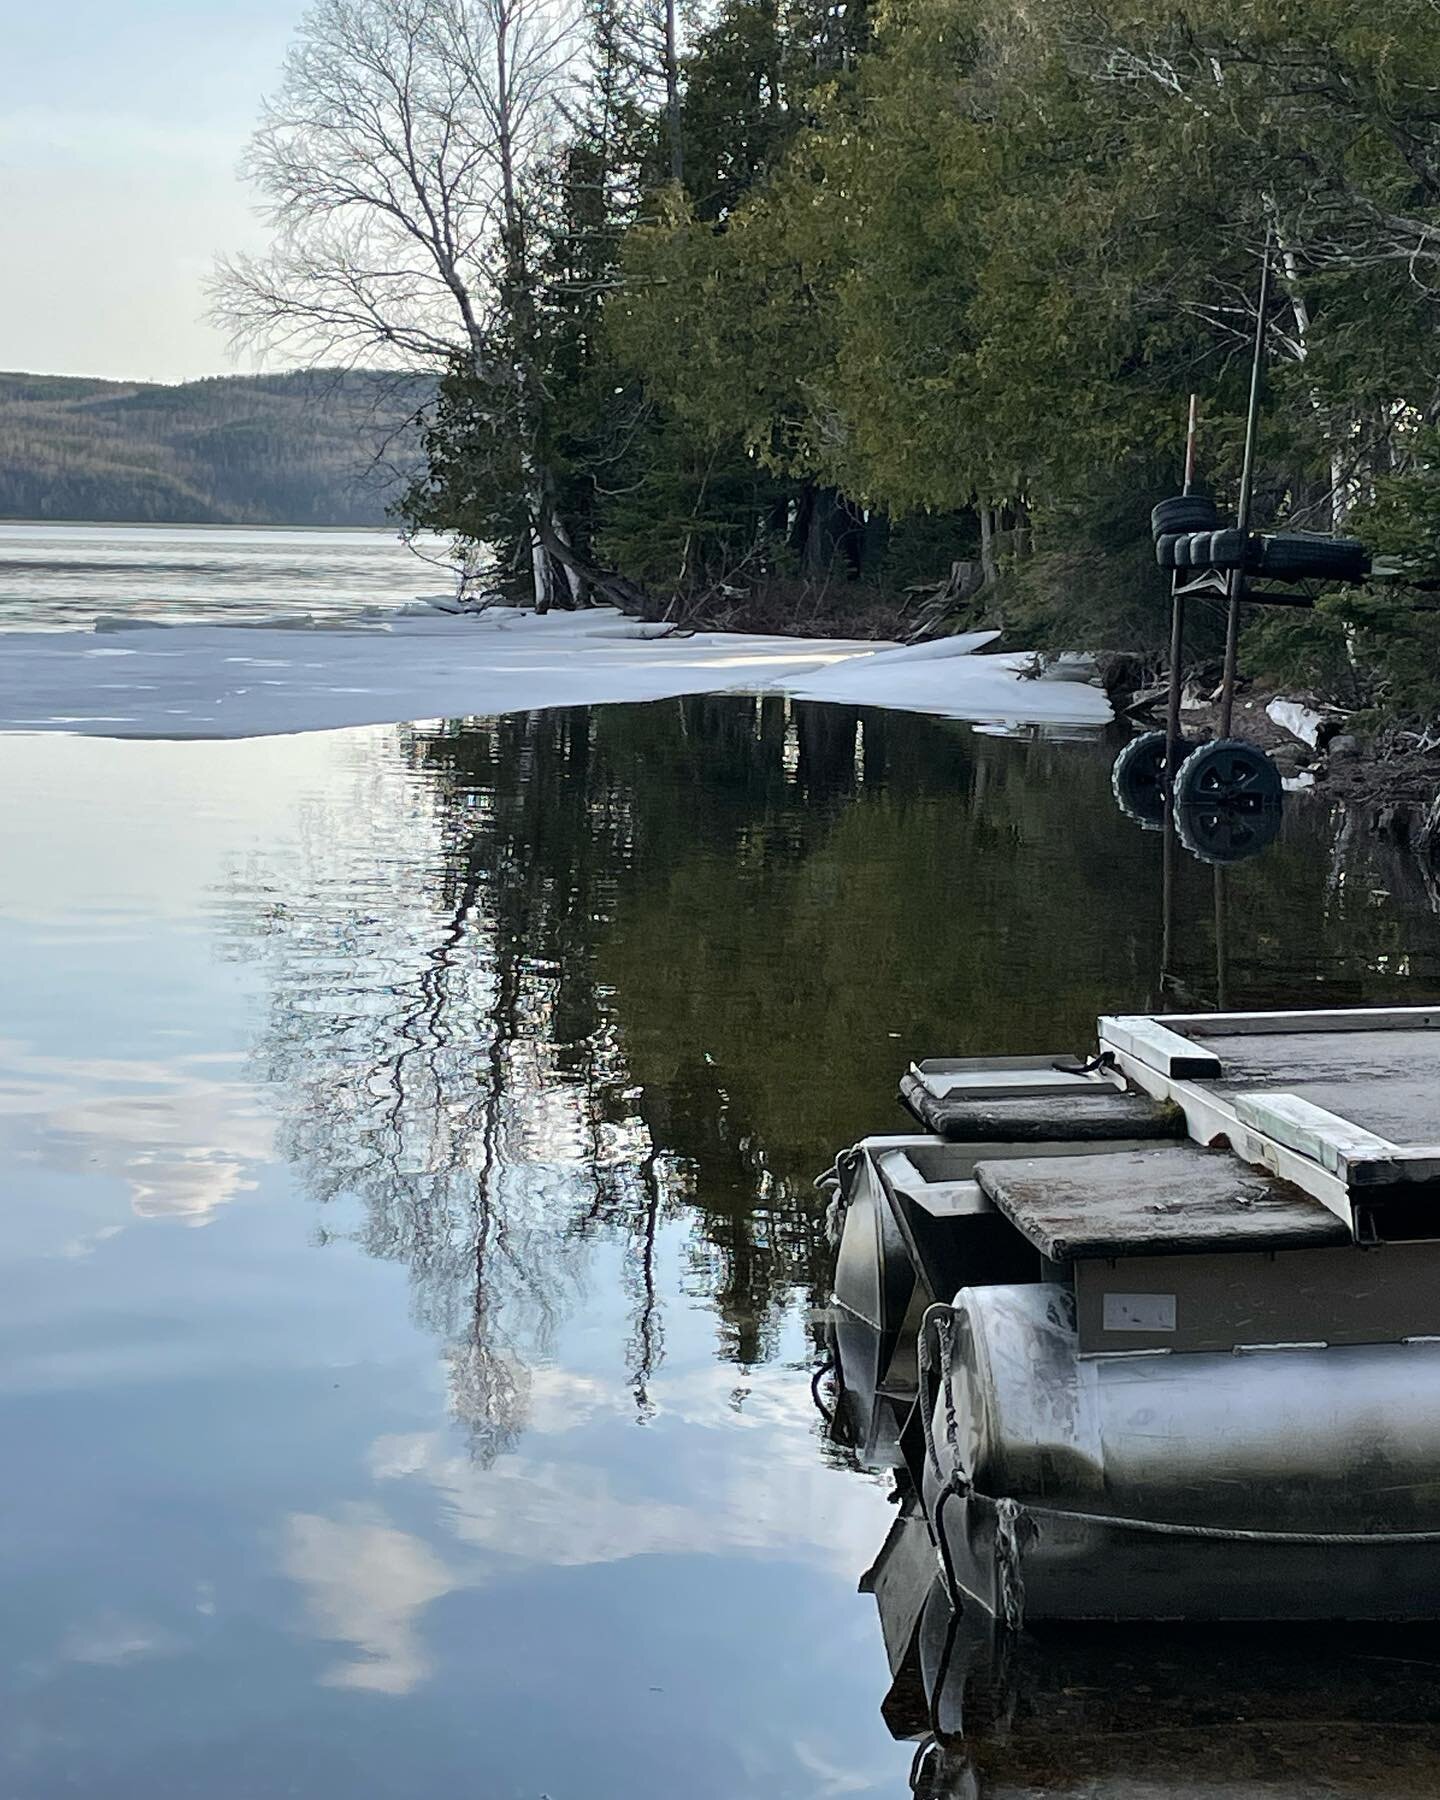 It was a great opening weekend! The docks went in, trout were caught and consumed, and we reveled in the sunshine and ice-free lake. Spring will be short this year. Ready or not, here comes summer! 😎🌞#iamready